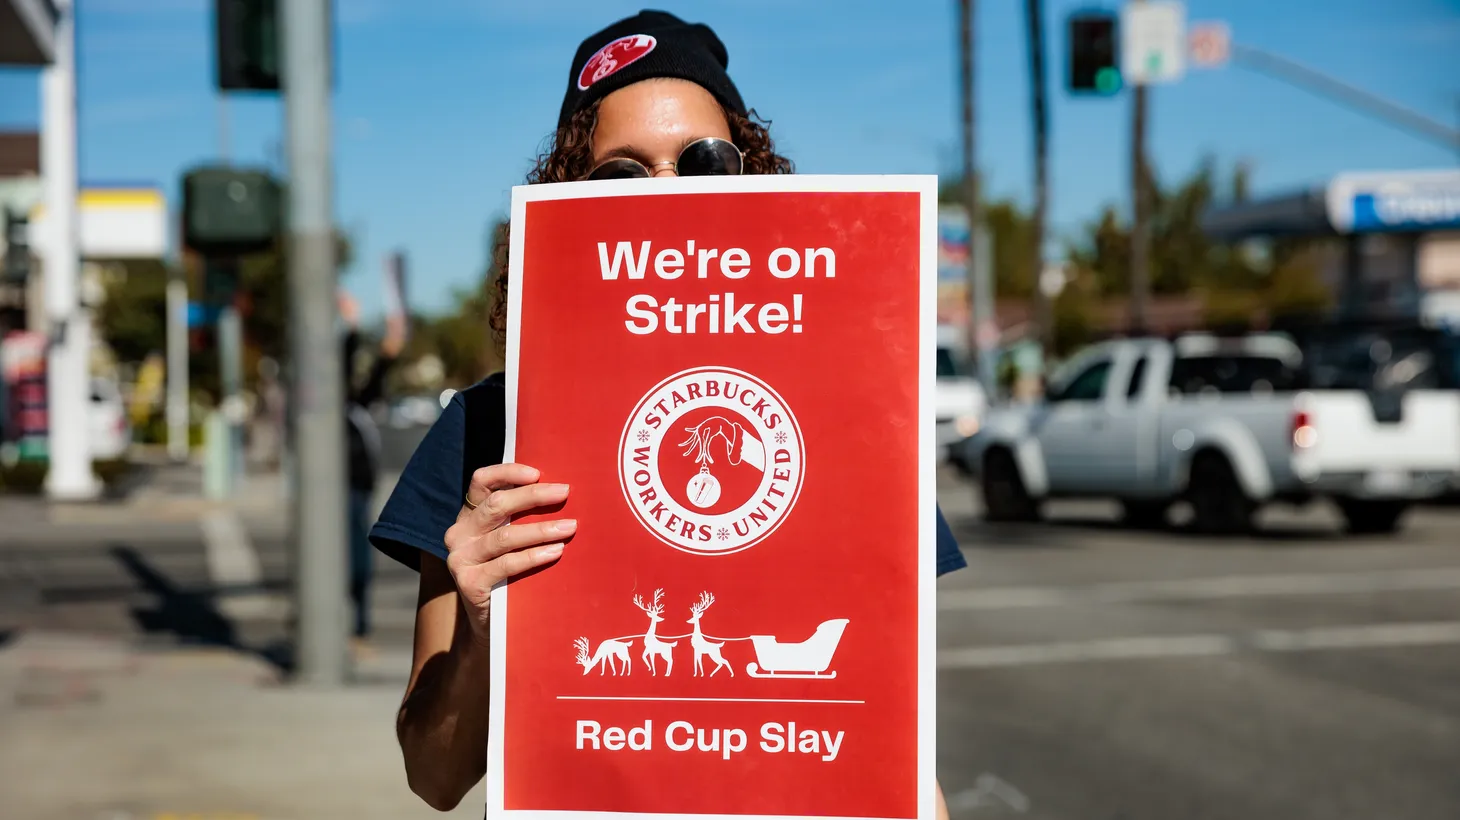 “There is something about fast food work that is incredibly grueling, very challenging, very demanding. And these workers, they’re not asking for a ton of money,” says Eater LA’s Mona Holmes.